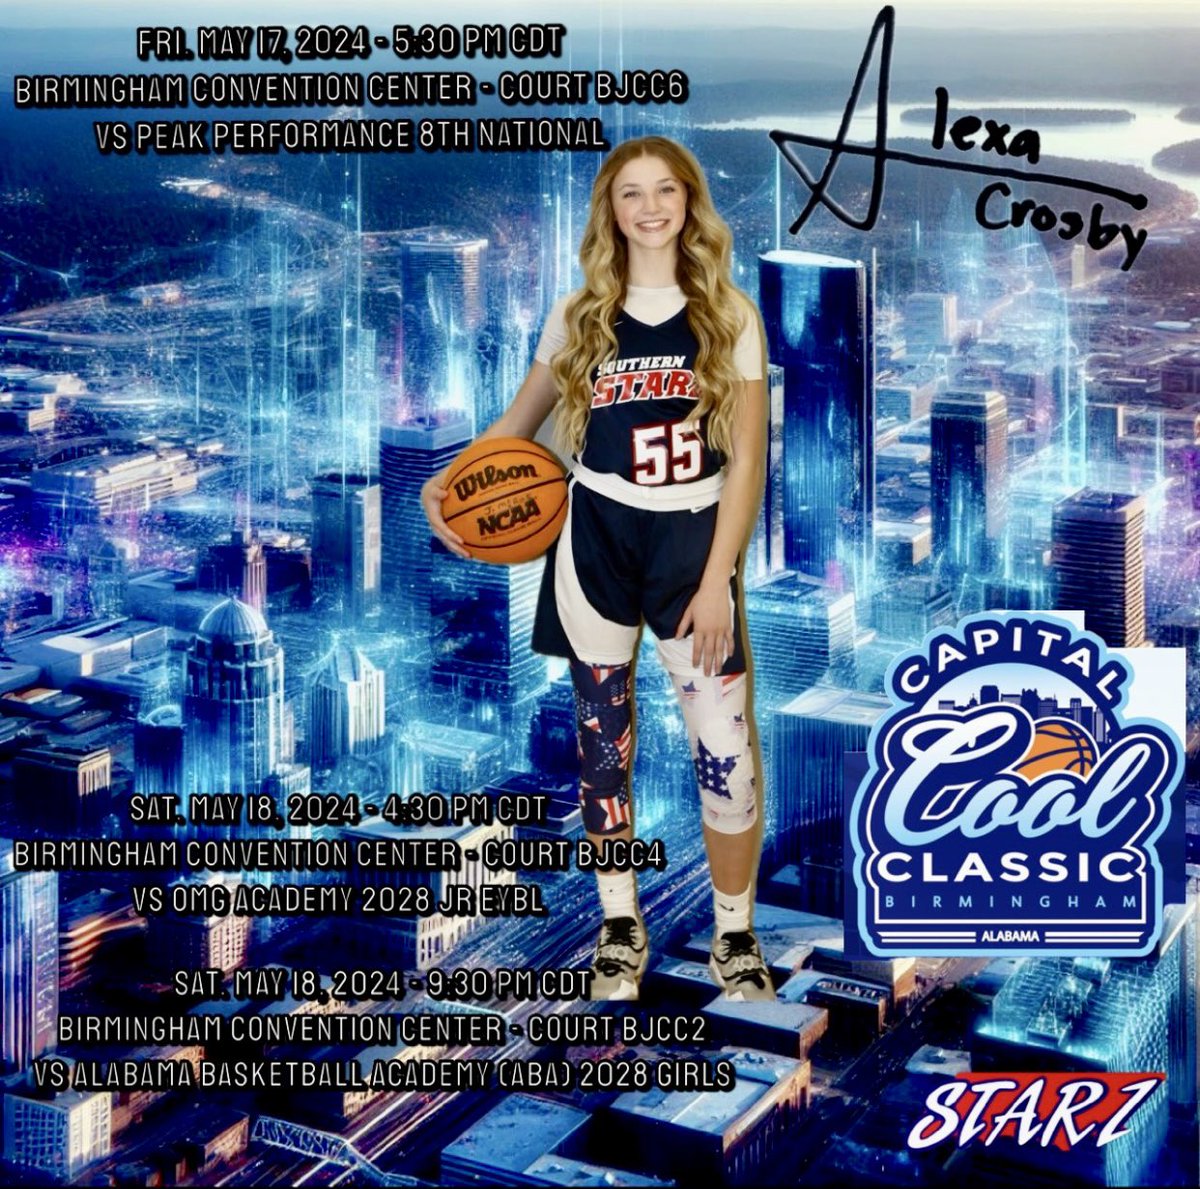 Taking on the 2028s at the 
🏀 Capital Cool Classic
📍Birmingham AL

👀👀👀👀👀👀👀👀👀